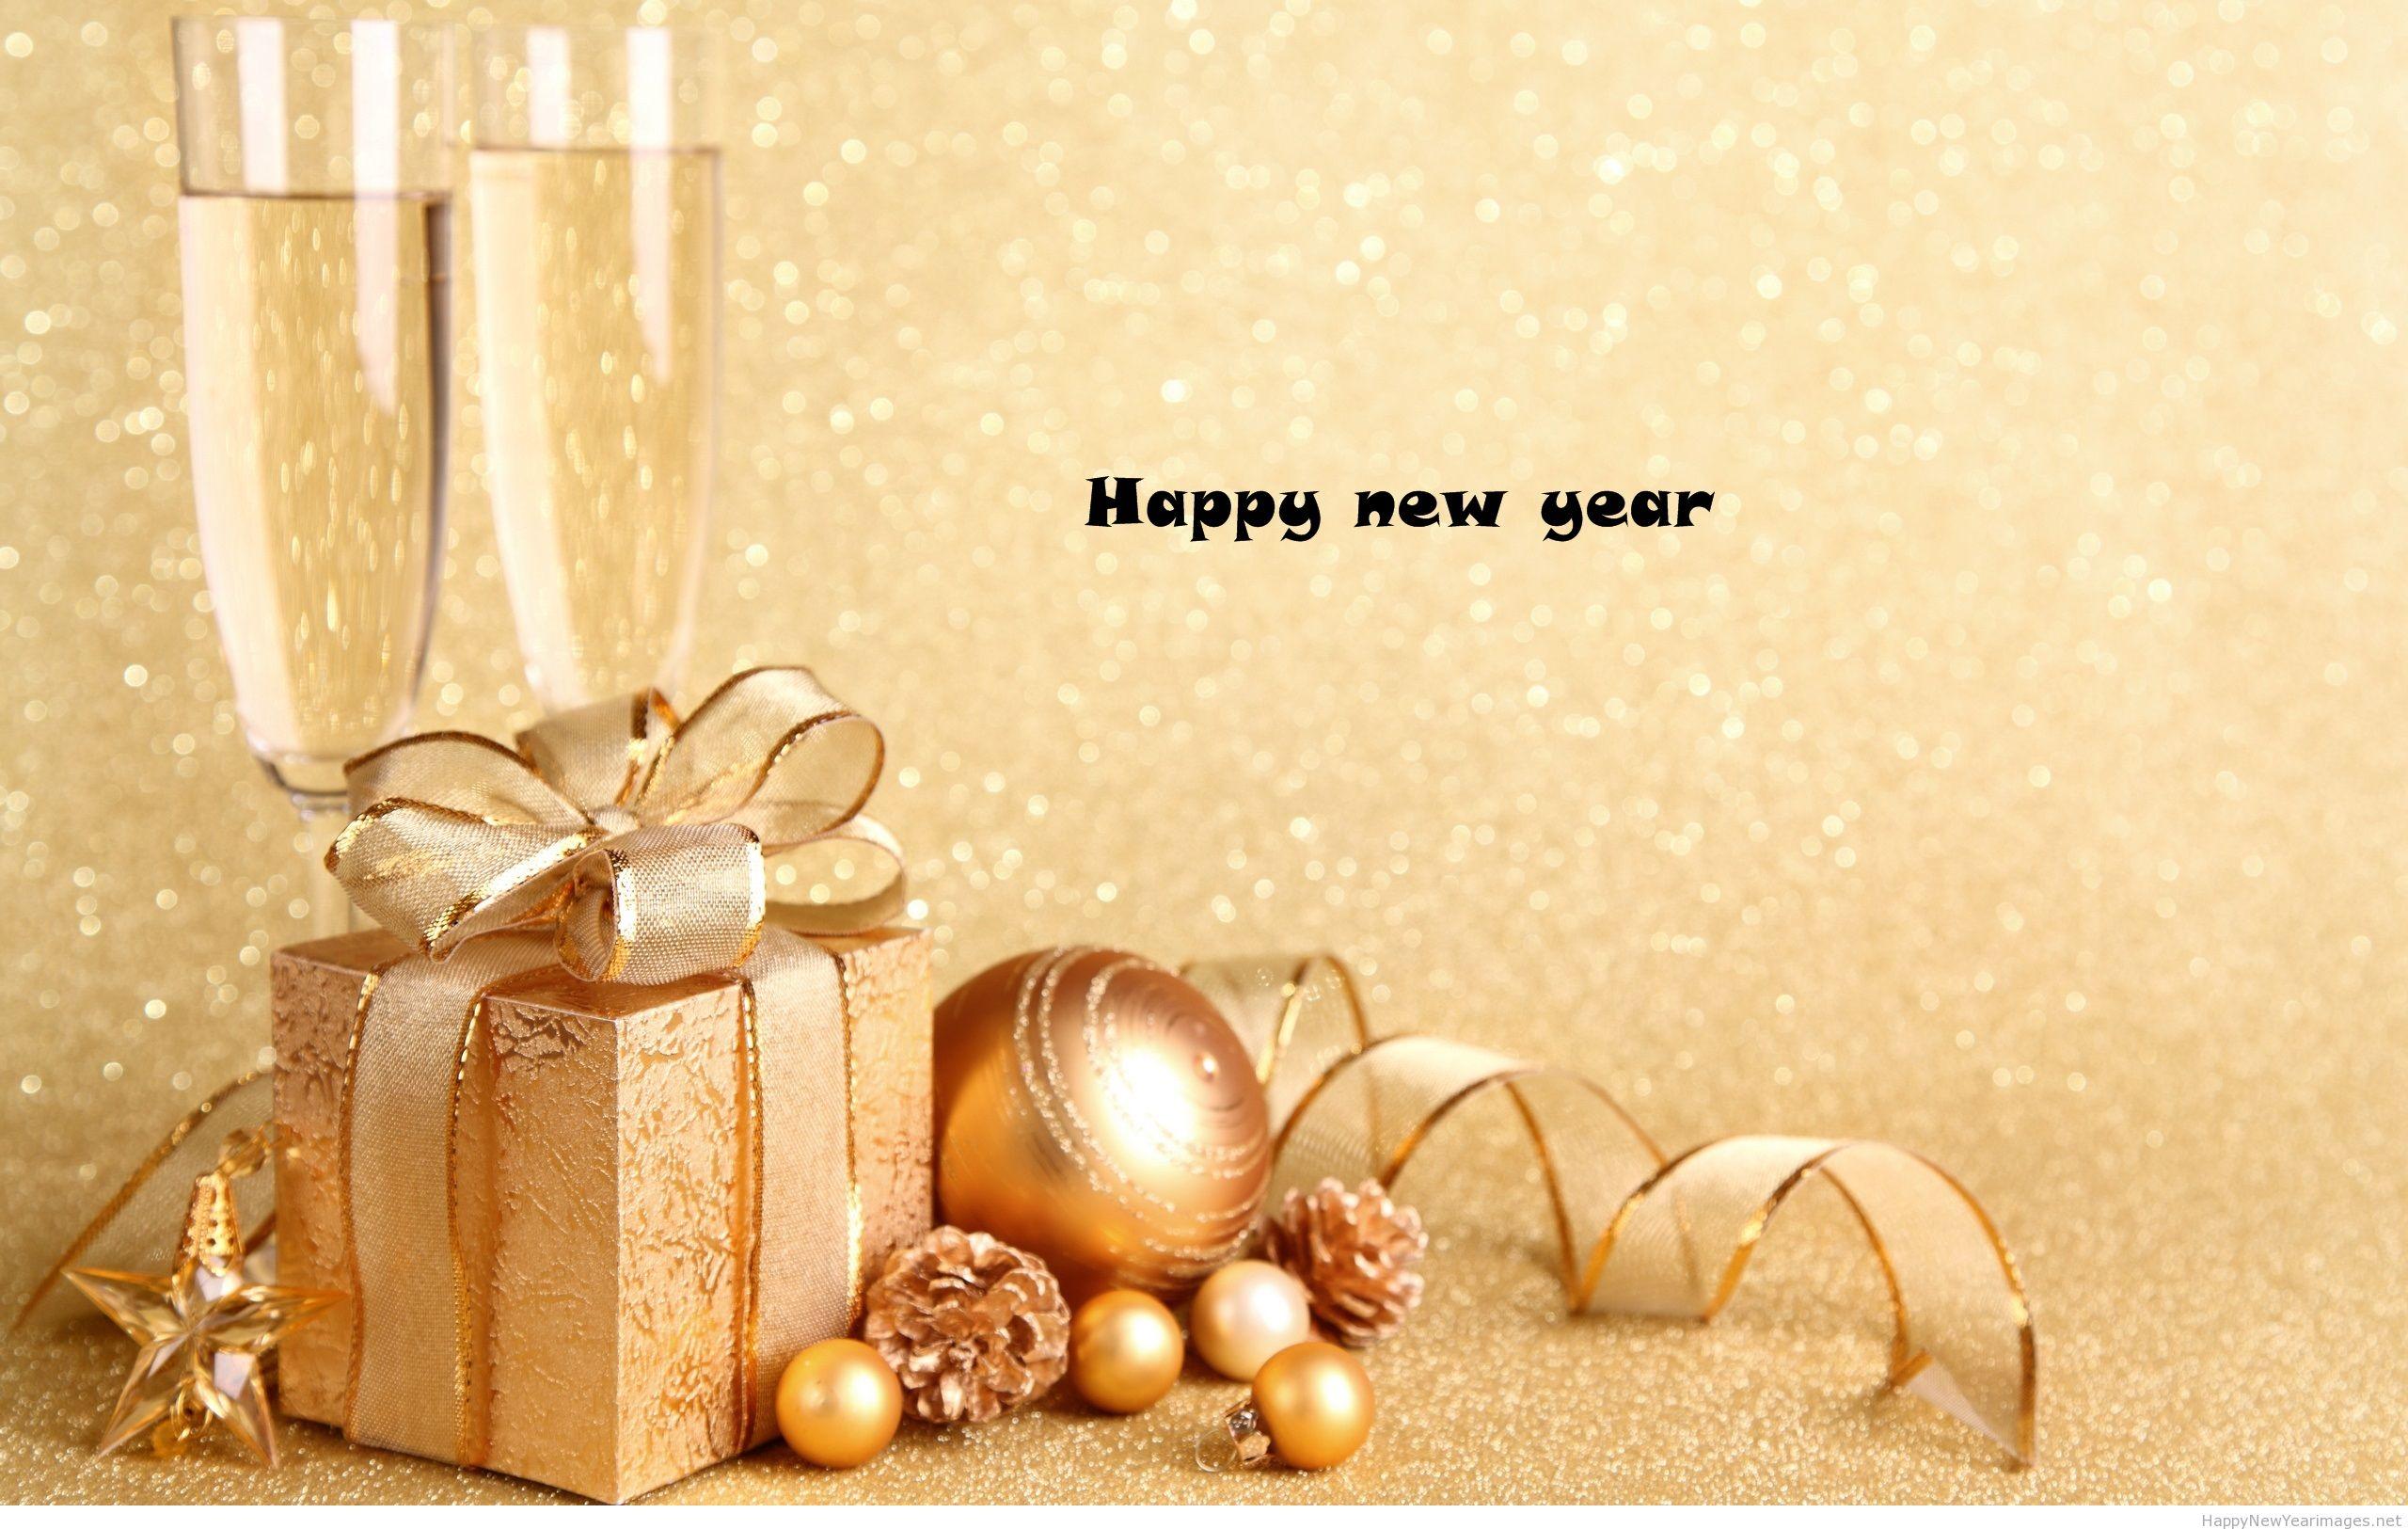 Happy new year 2015 champagne wallpaper